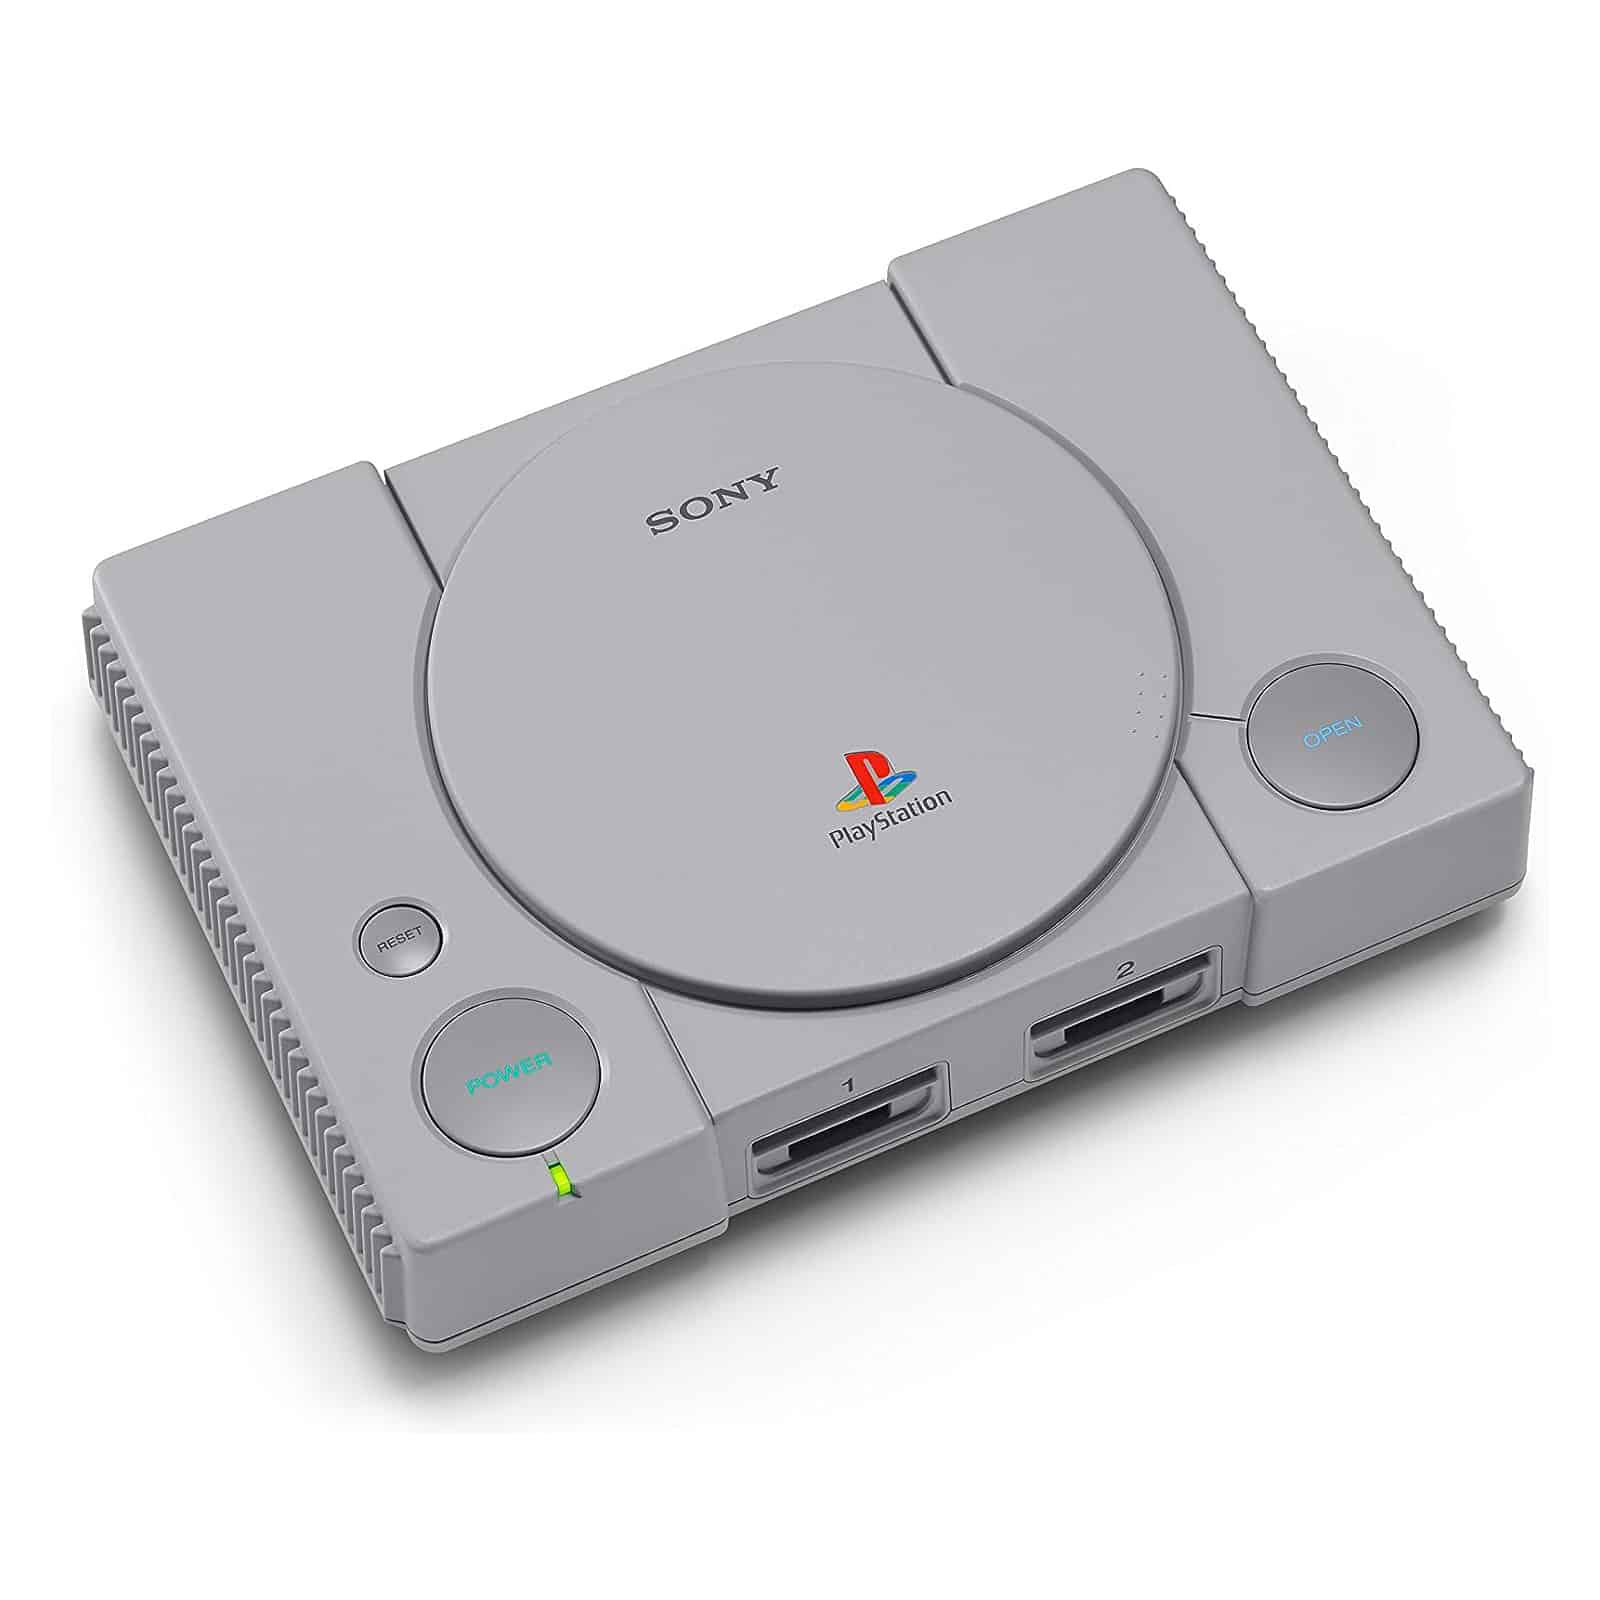 PlayStation Classic image 1